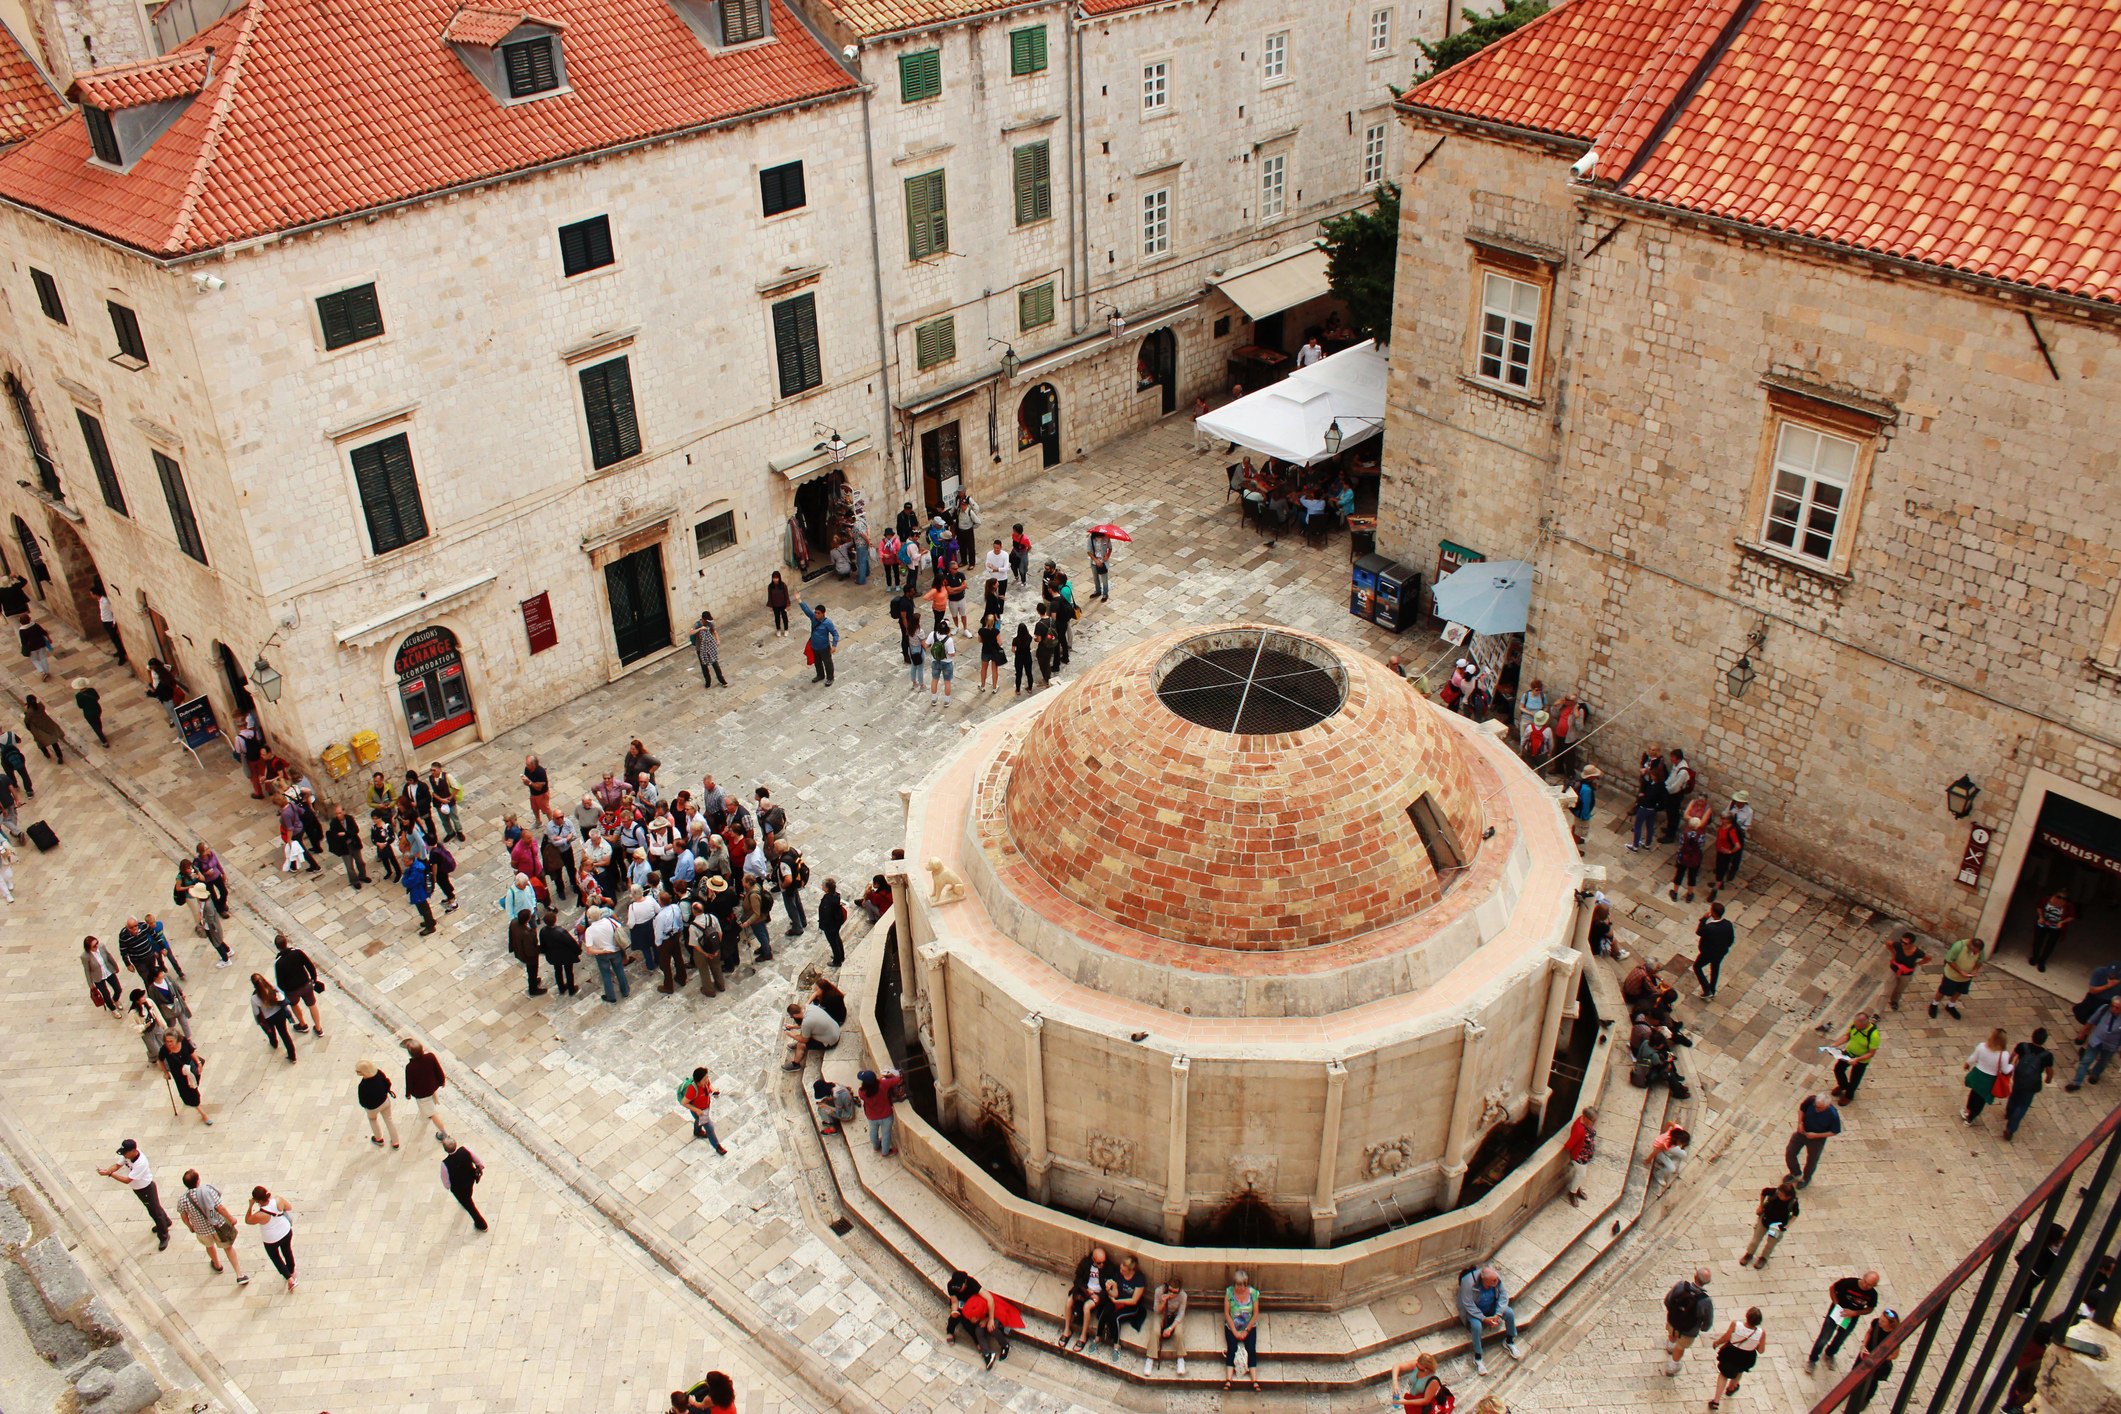 Tourists in the Old City of Dubrovnik